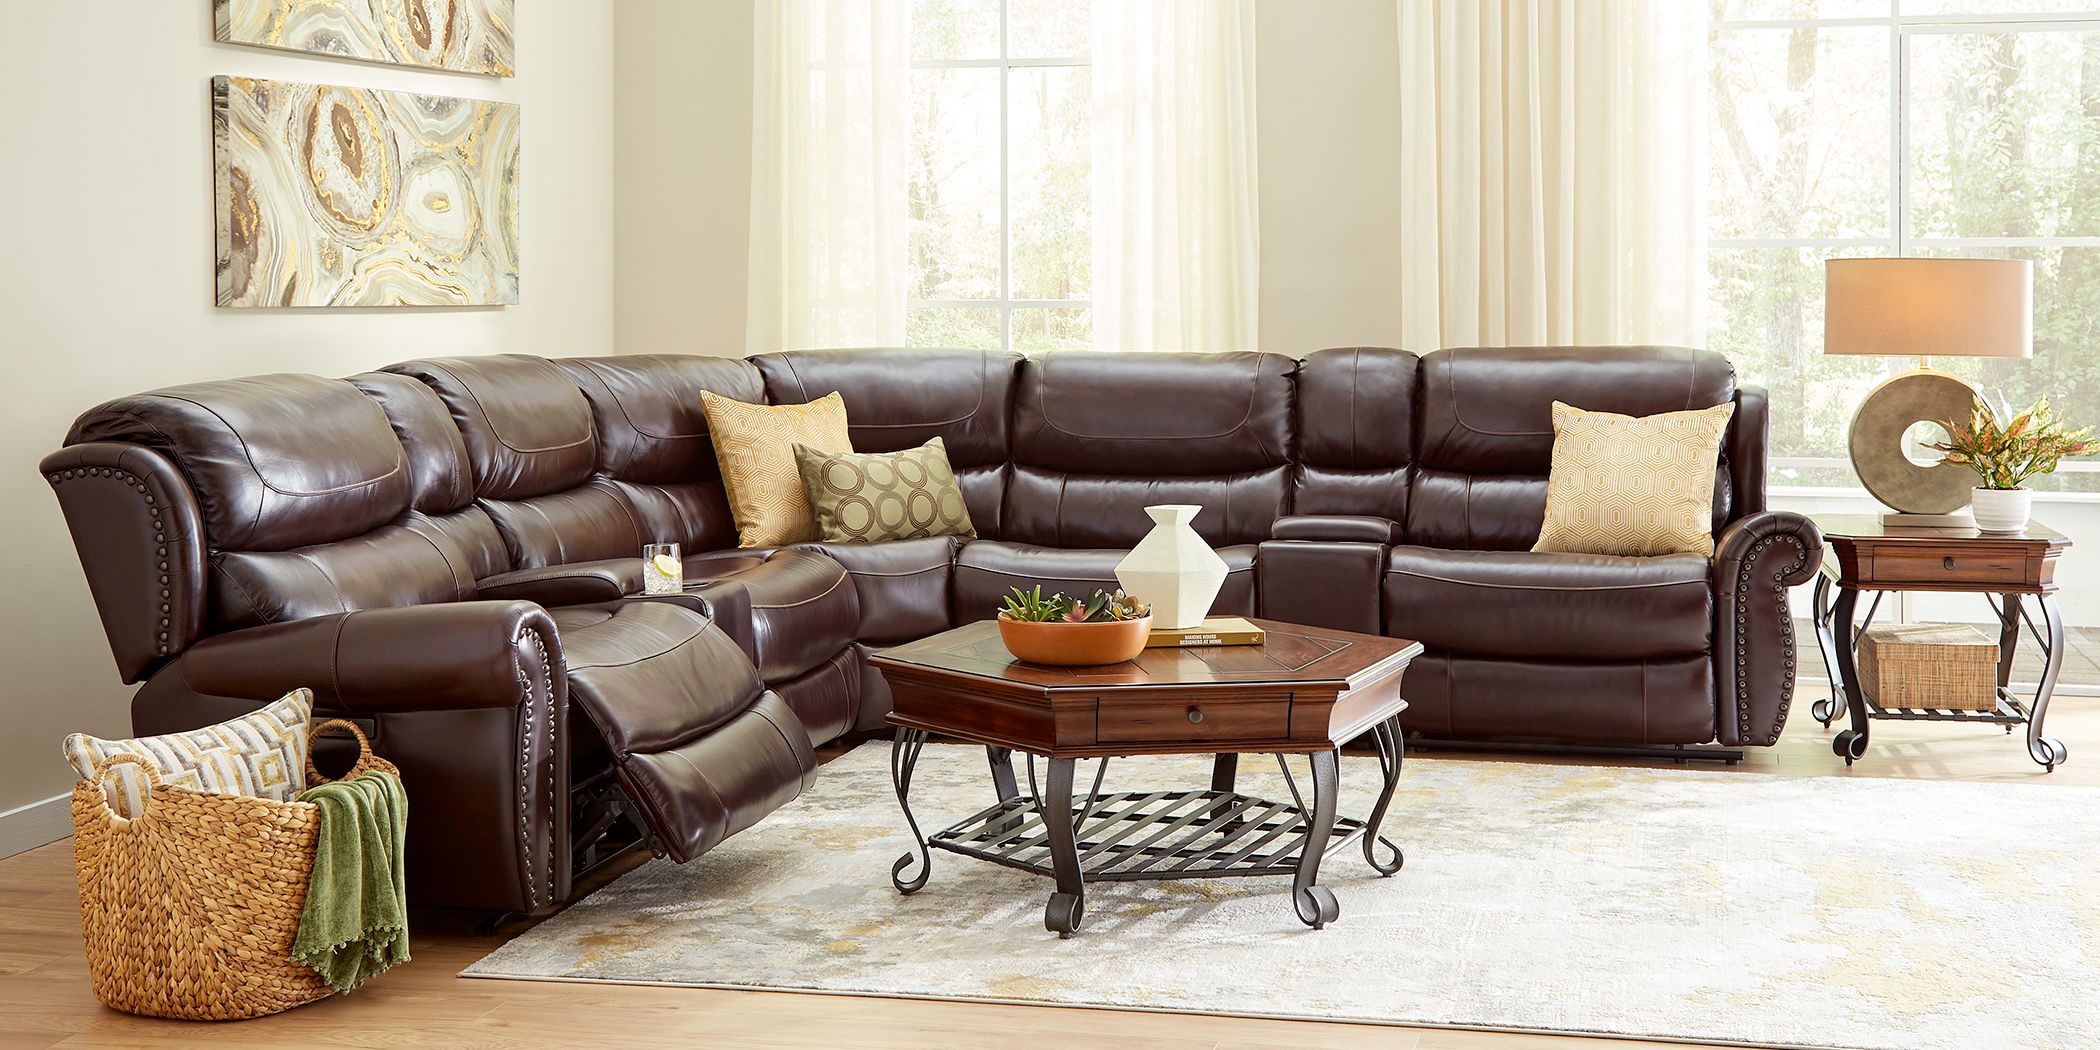 Living Room Sectional Sets With Recliners